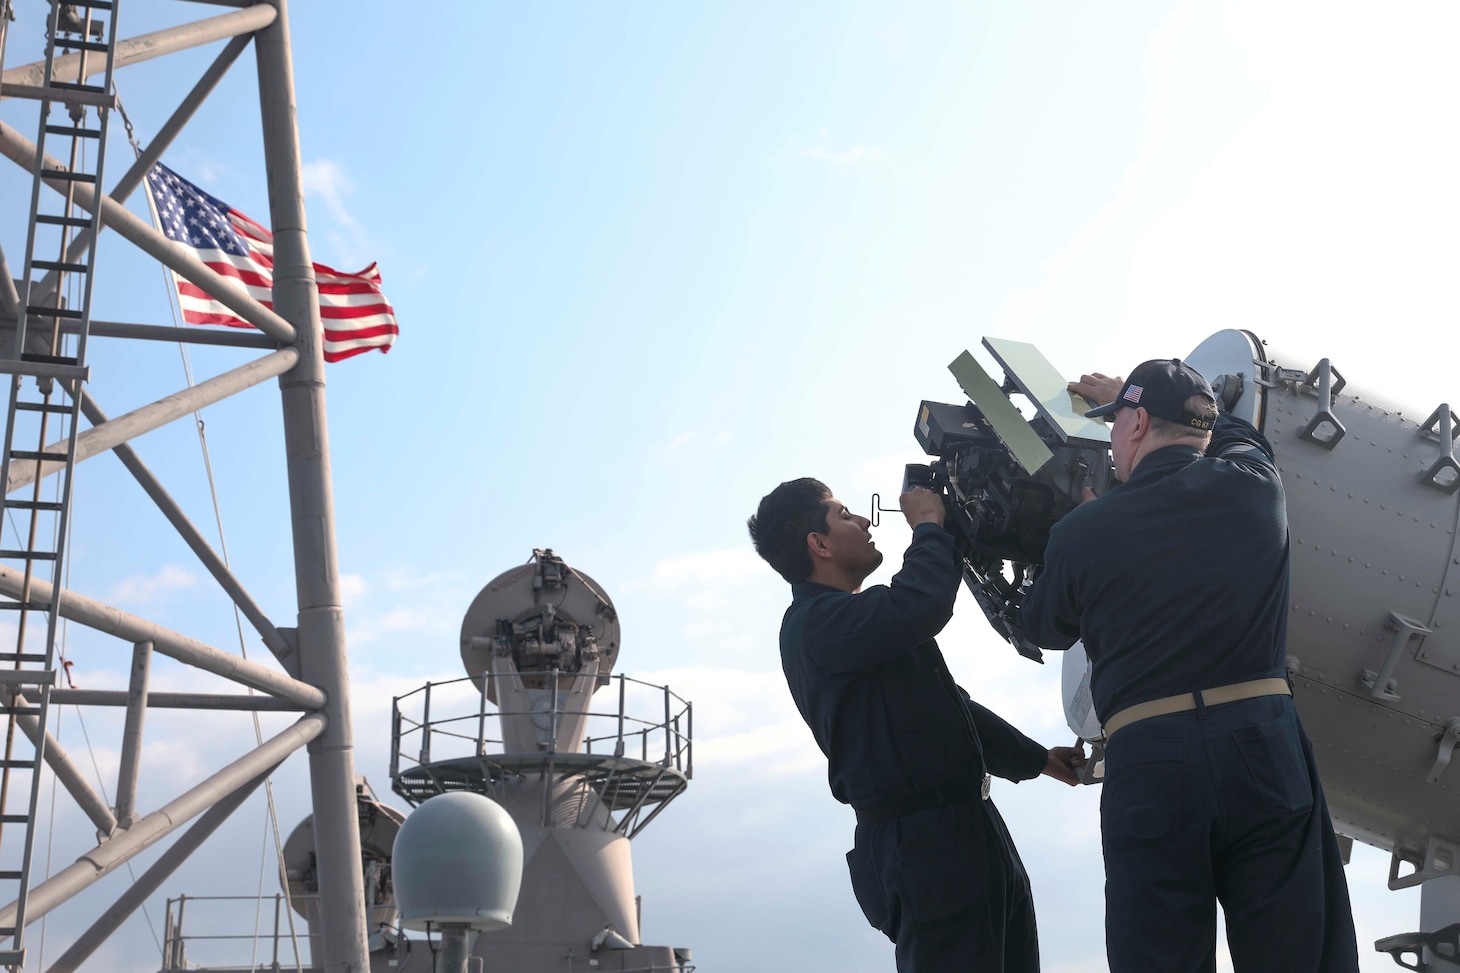 Fire Controlman 2nd Class Francisco Morales, from Long Beach, California, left, and Chief Fire Controlman Wayne Whalen, from San Diego, California, work on the Phalanx close-in weapons system (CIWS) aboard the Ticonderoga-class guided-missile cruiser USS Chancellorsville (CG 62) in the Philippine Sea, Jan. 20. Chancellorsville is assigned to Commander, Task Force 70/Carrier Strike Group 5 underway preforming routine operations in support of a free and open Indo-Pacific.